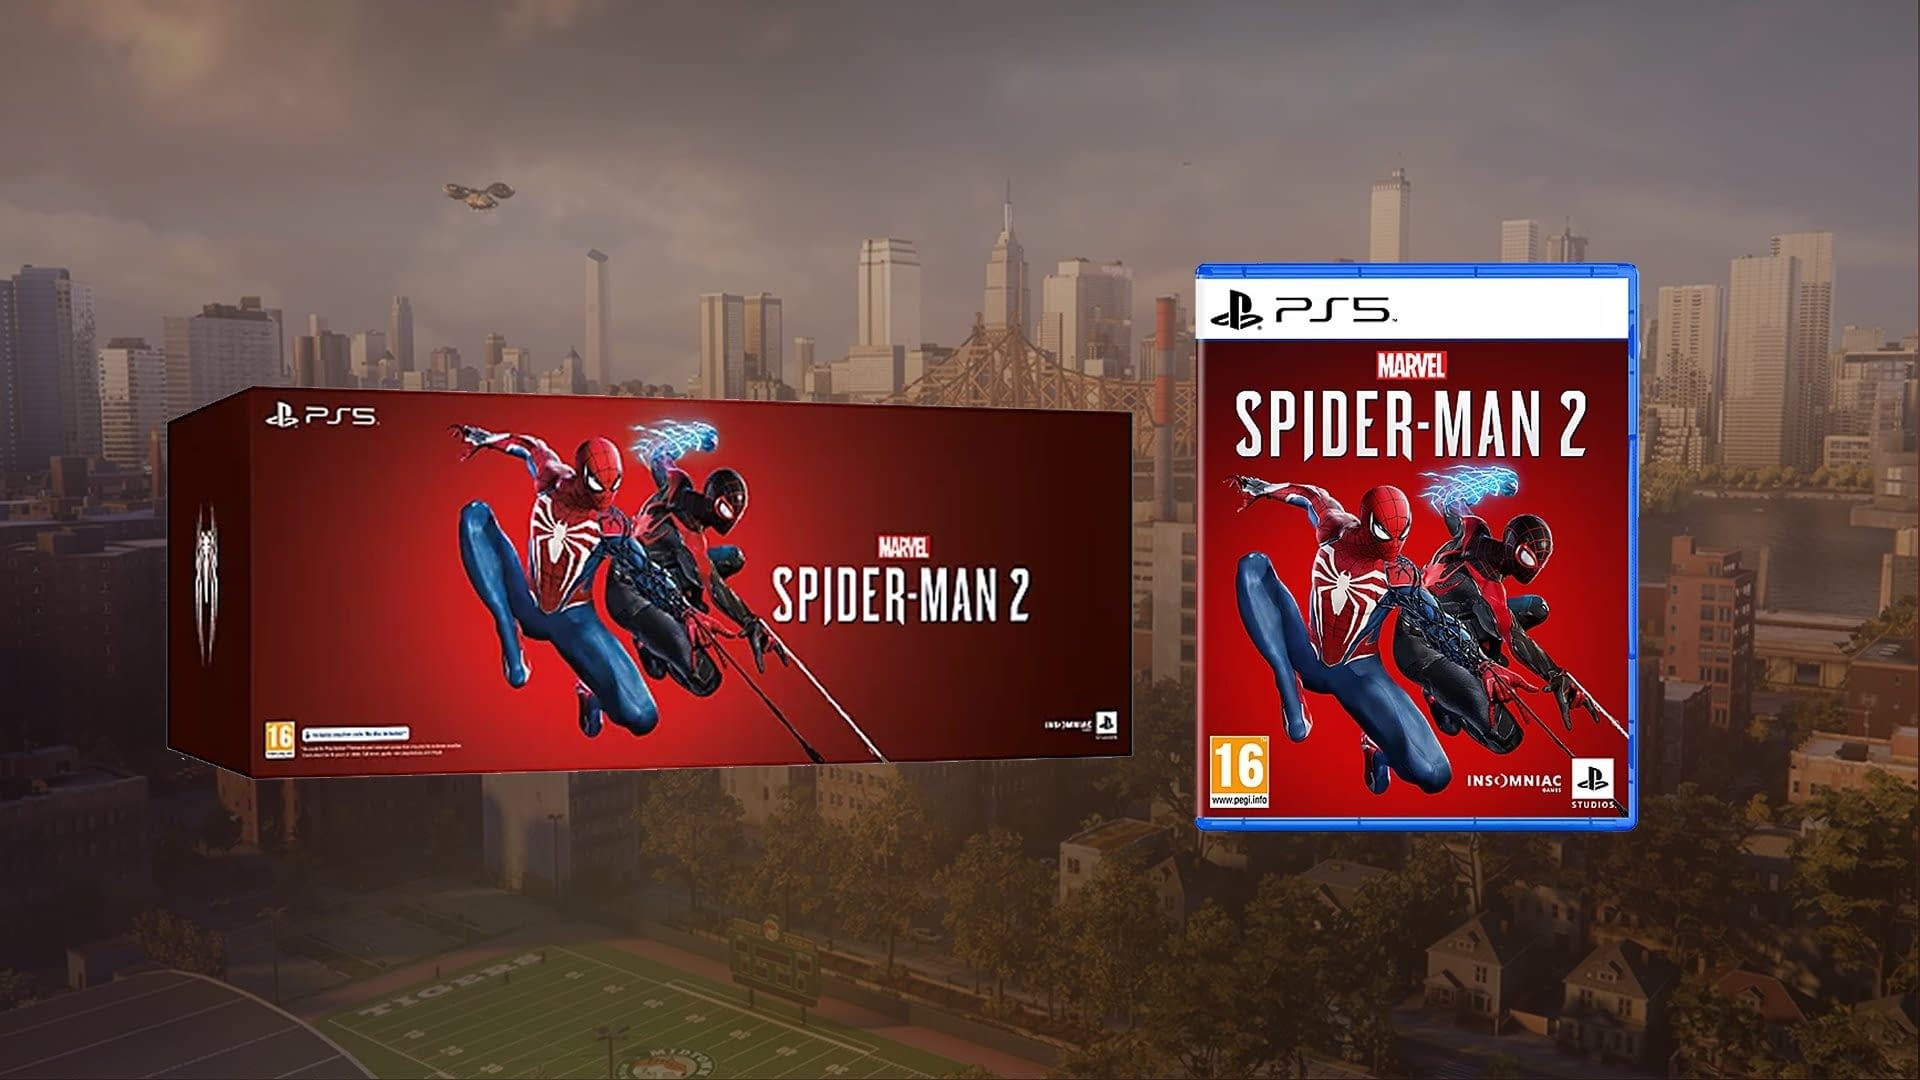 Some Spider-Man 2 Tells Physical Versions Not Working